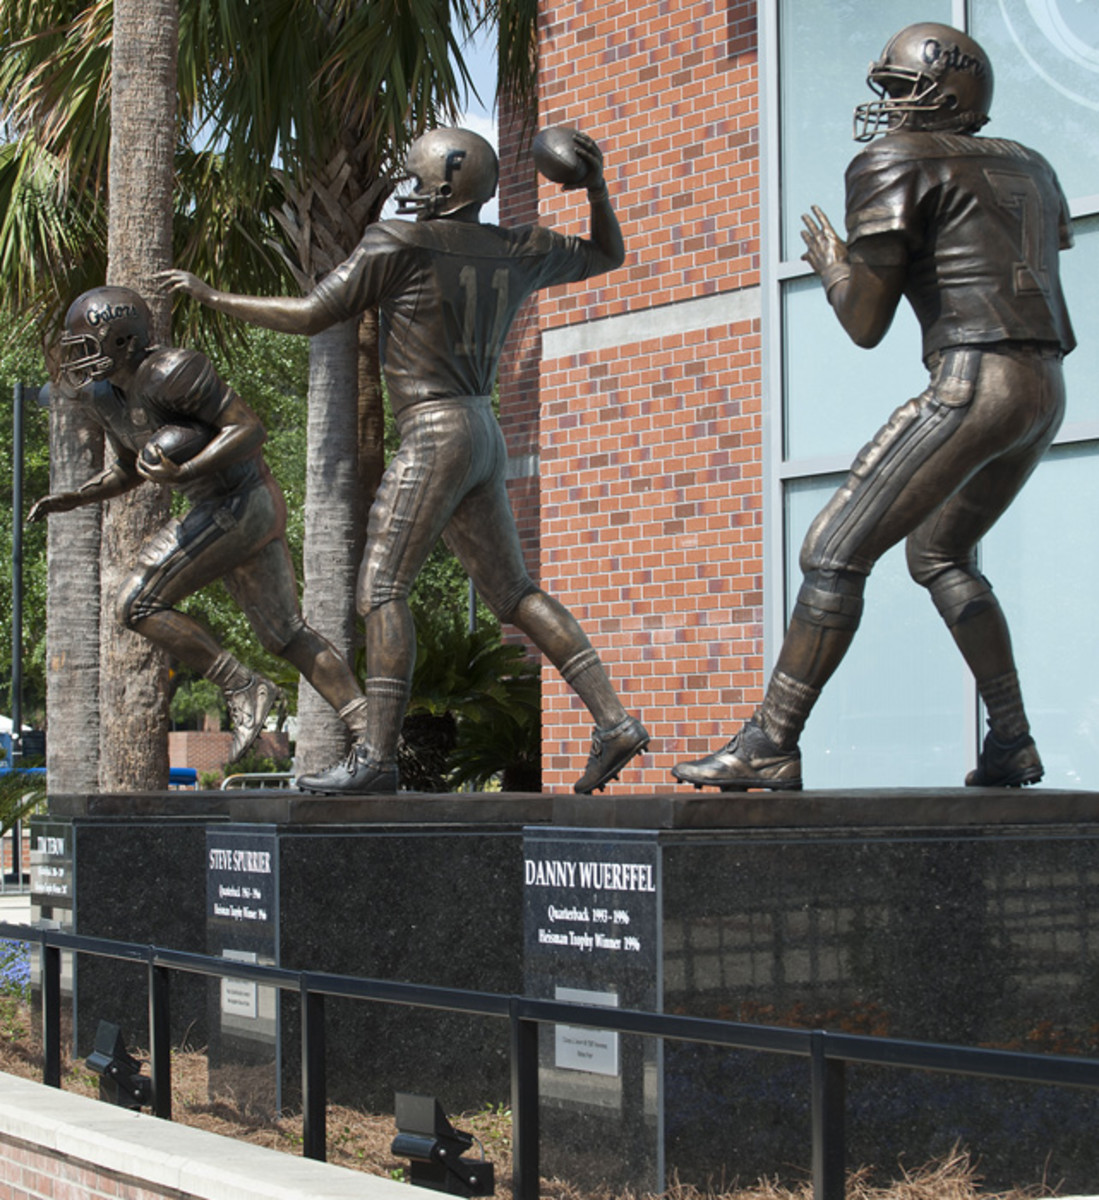 Tim Tebow, Steve Spurrier and Danny Wuerffel